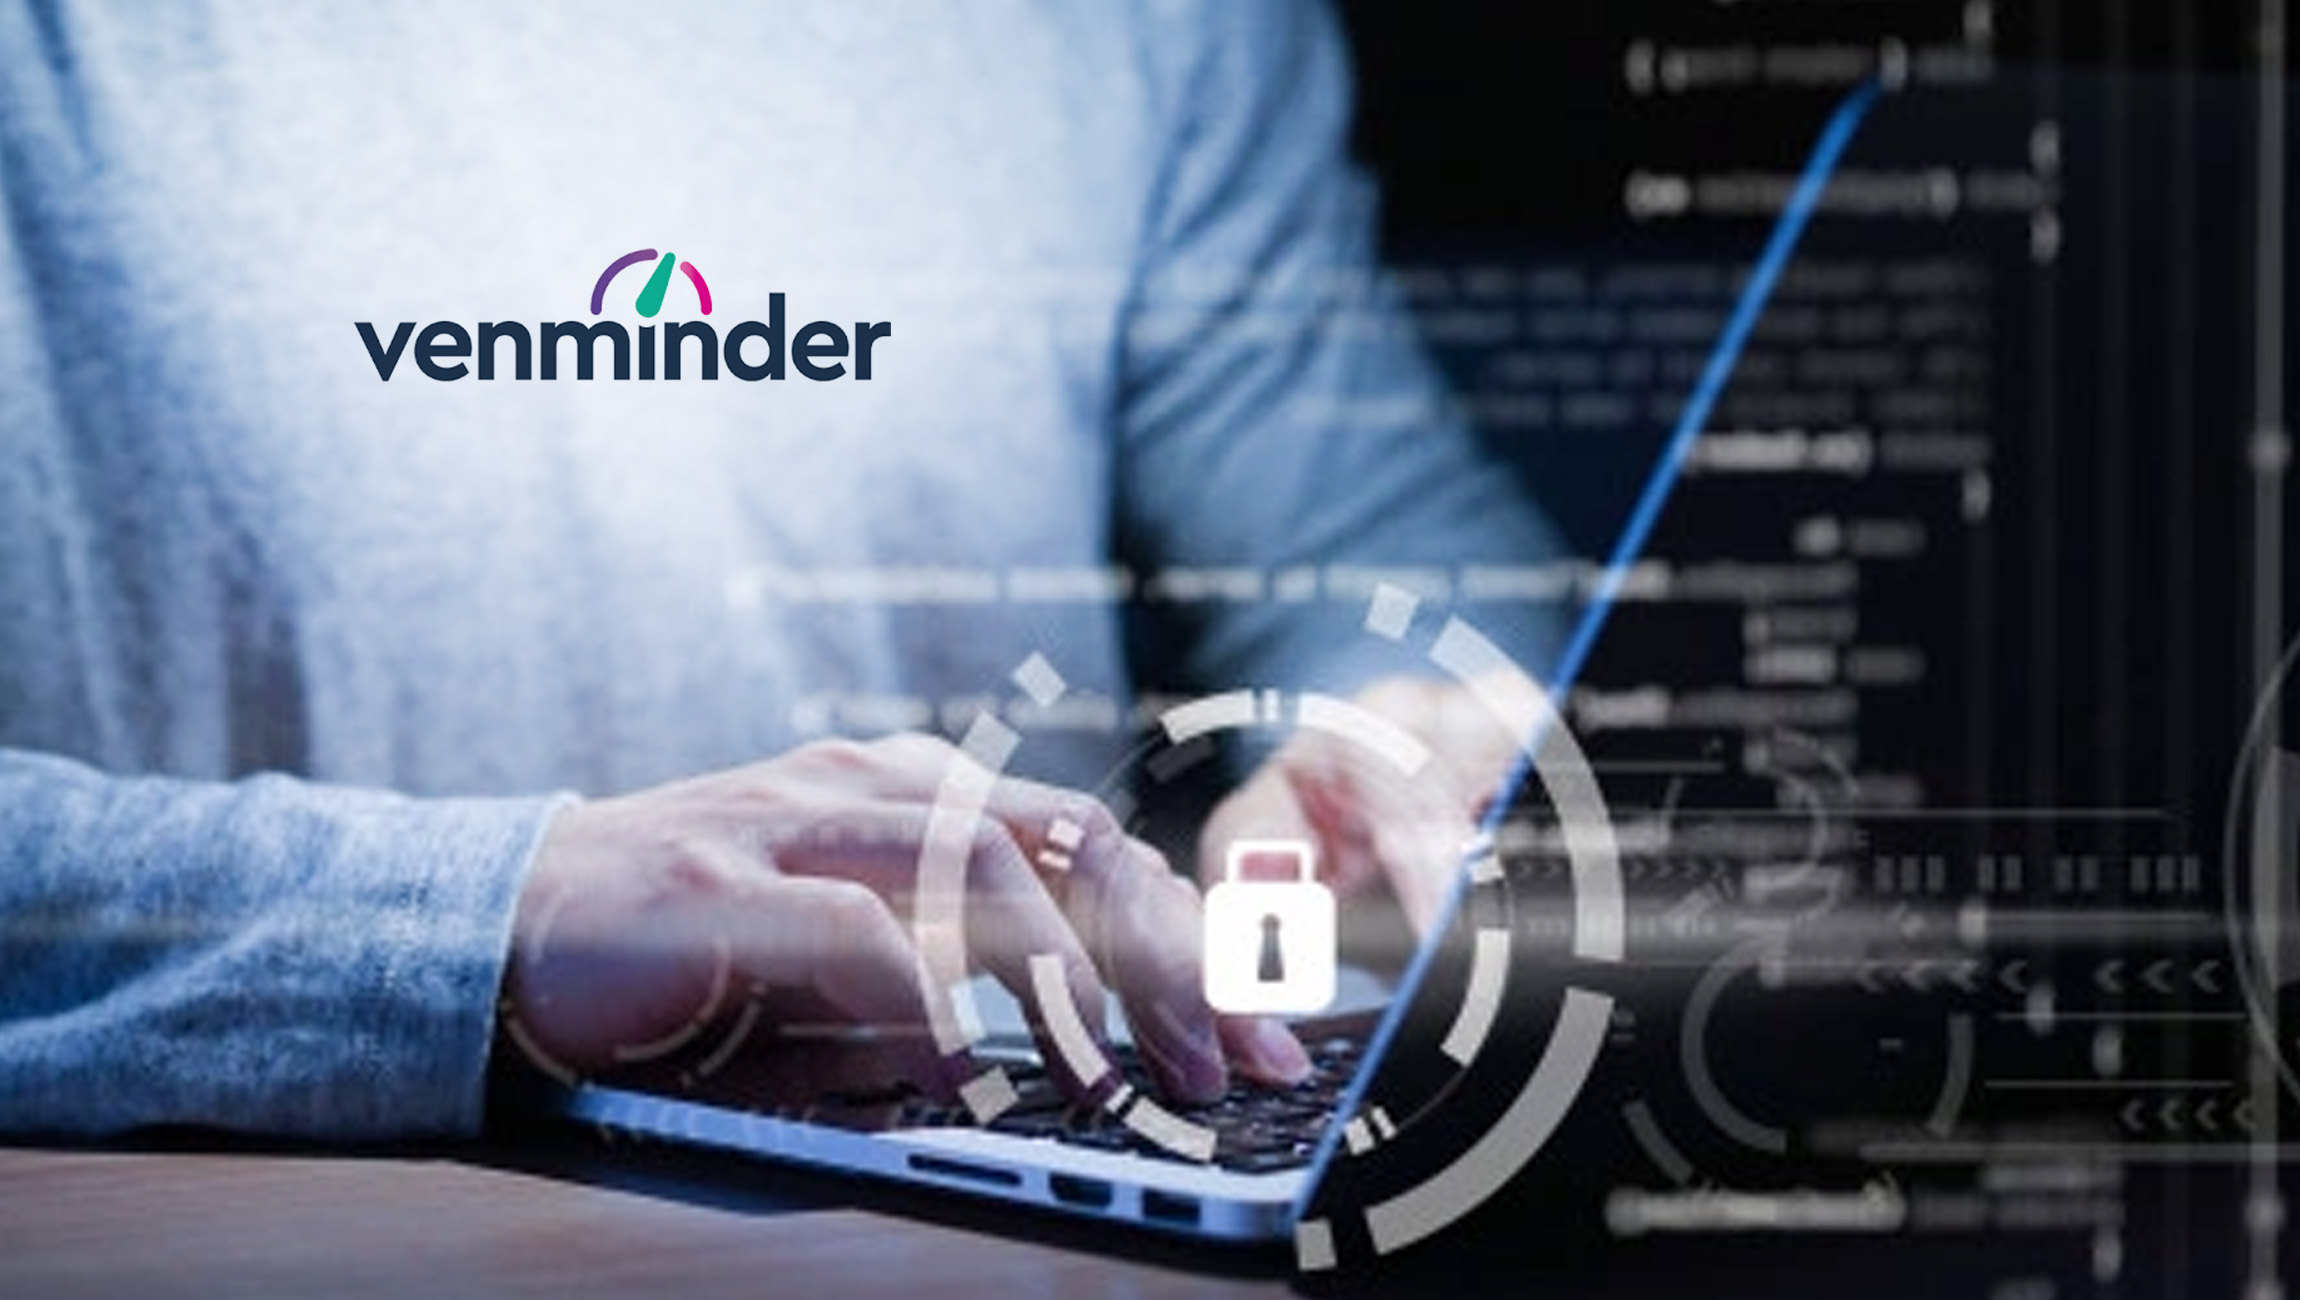 Venminder Announces Venmonitor, a New Tool to Streamline Third-Party Risk Monitoring Across Multiple Domains